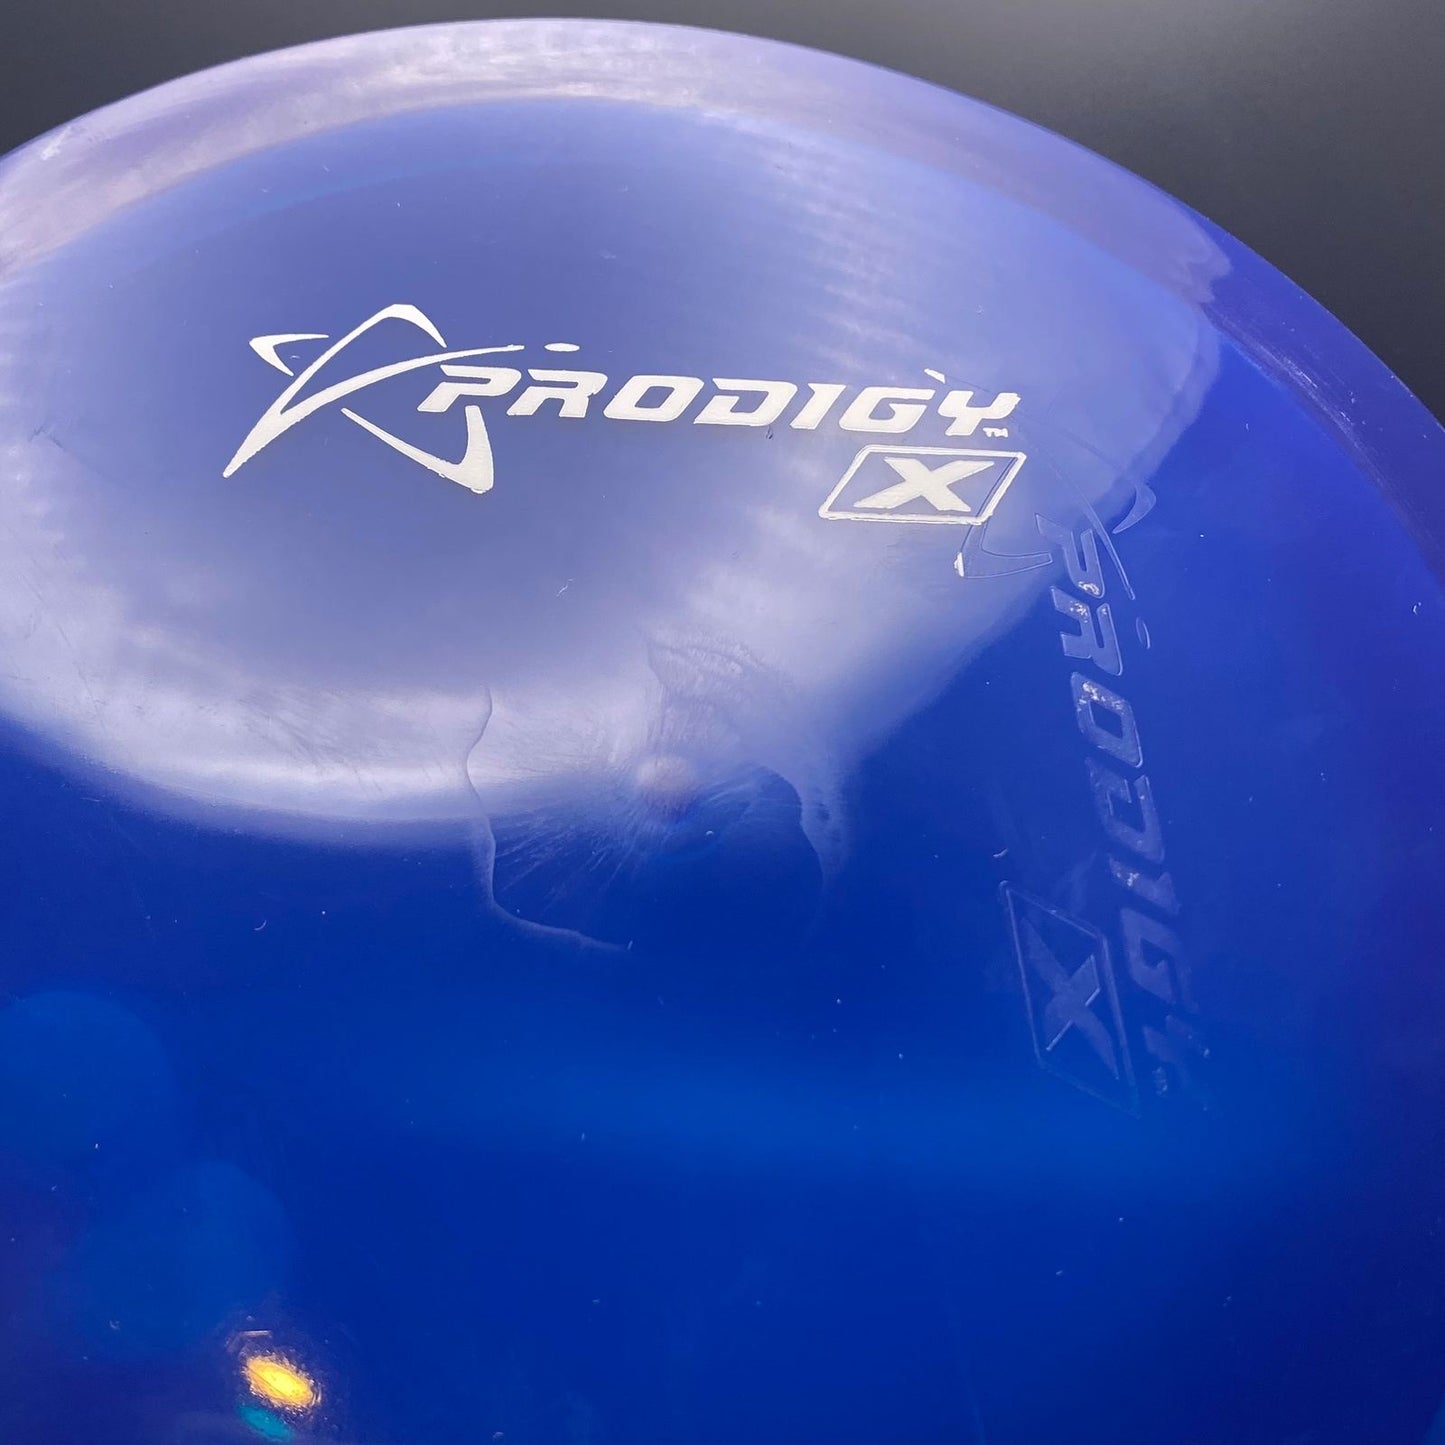 F3 400 Control Driver - X Out Prodigy